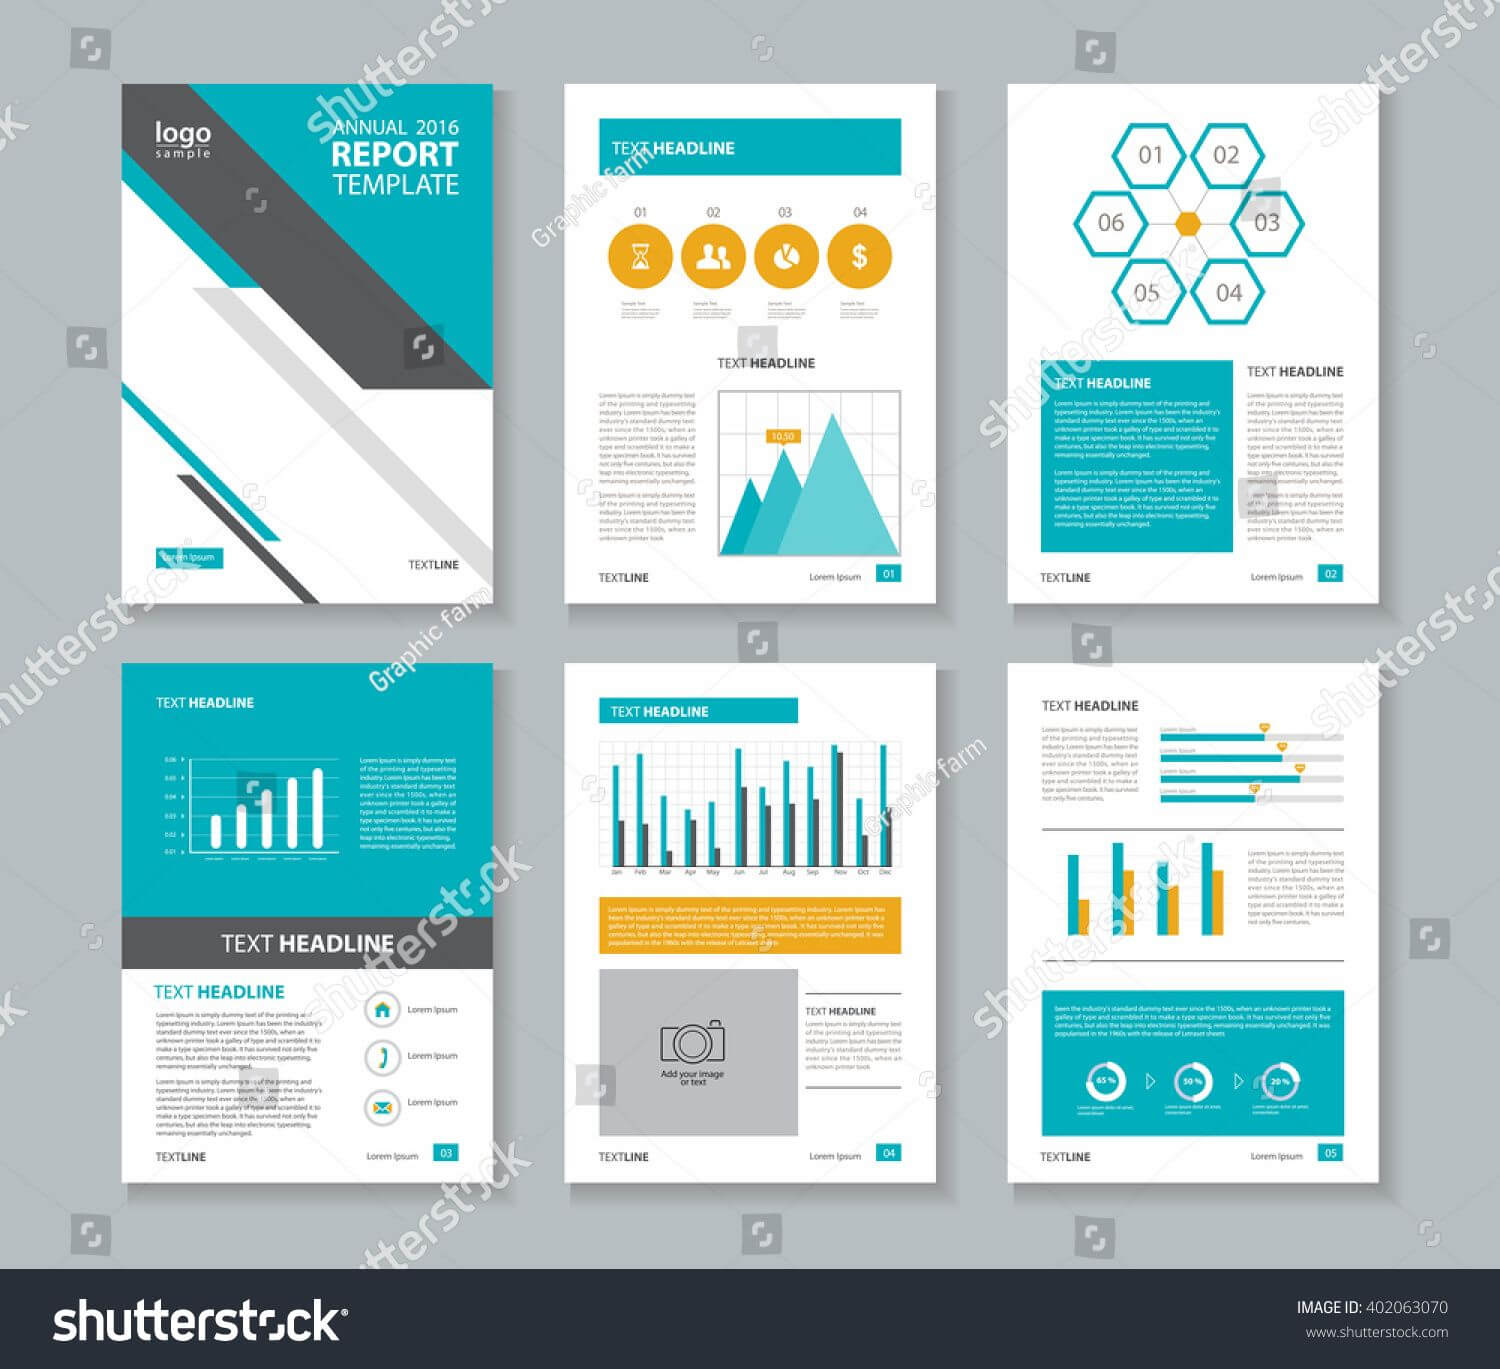 Pinsharon K On Design : Info Display | Company Profile Throughout Word Annual Report Template